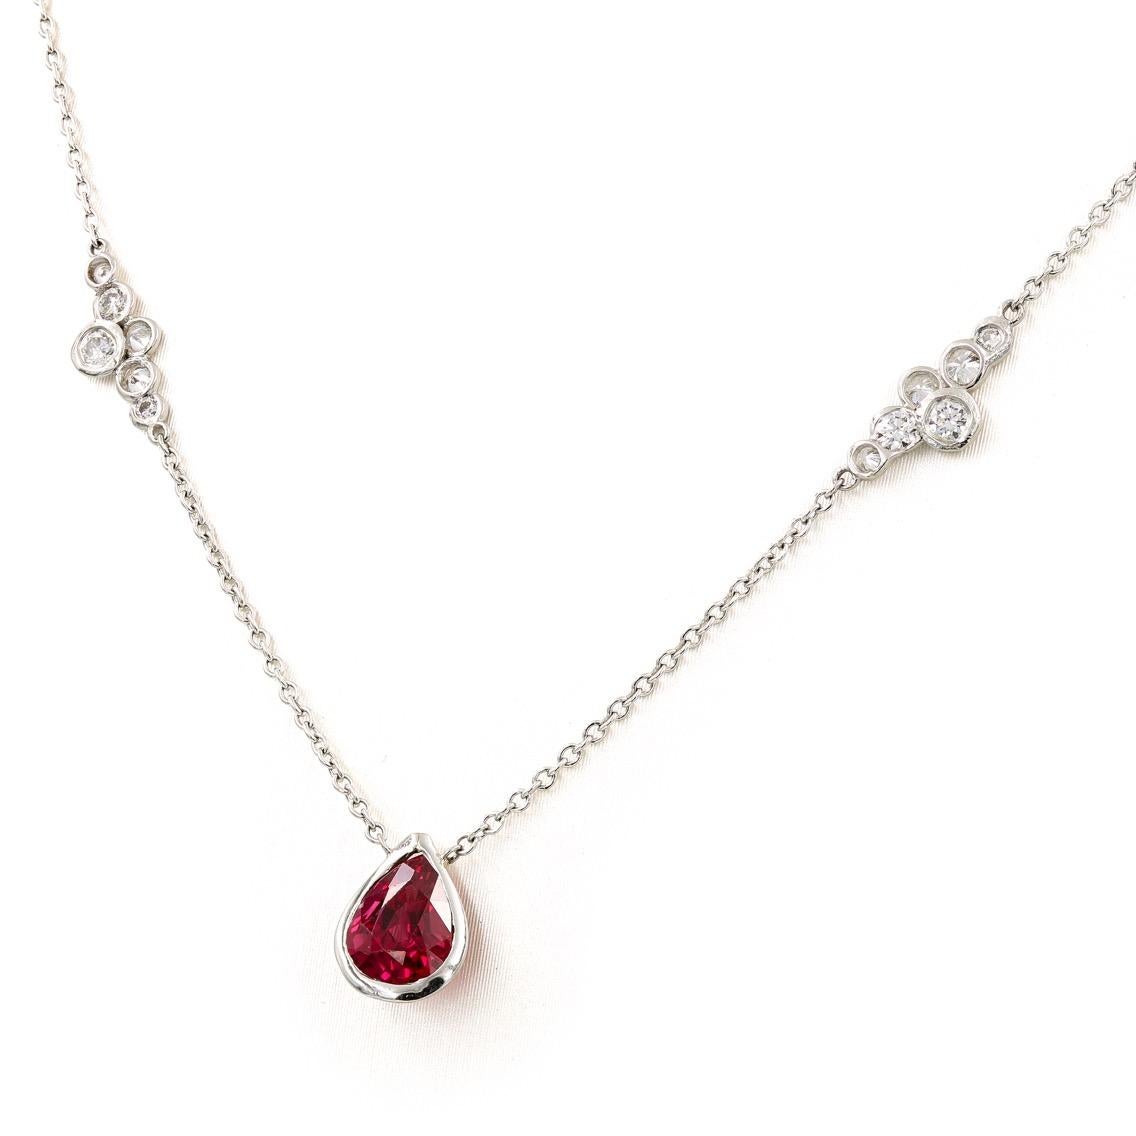 This Lester Lampert original necklace in platinum has a pear shape ruby center = .98ct. and two small pirouette diamond sections with .40ct. t.w. (the diamonds are G-H in color and VS clarity) The ruby stone is from Thailand and has only been heat